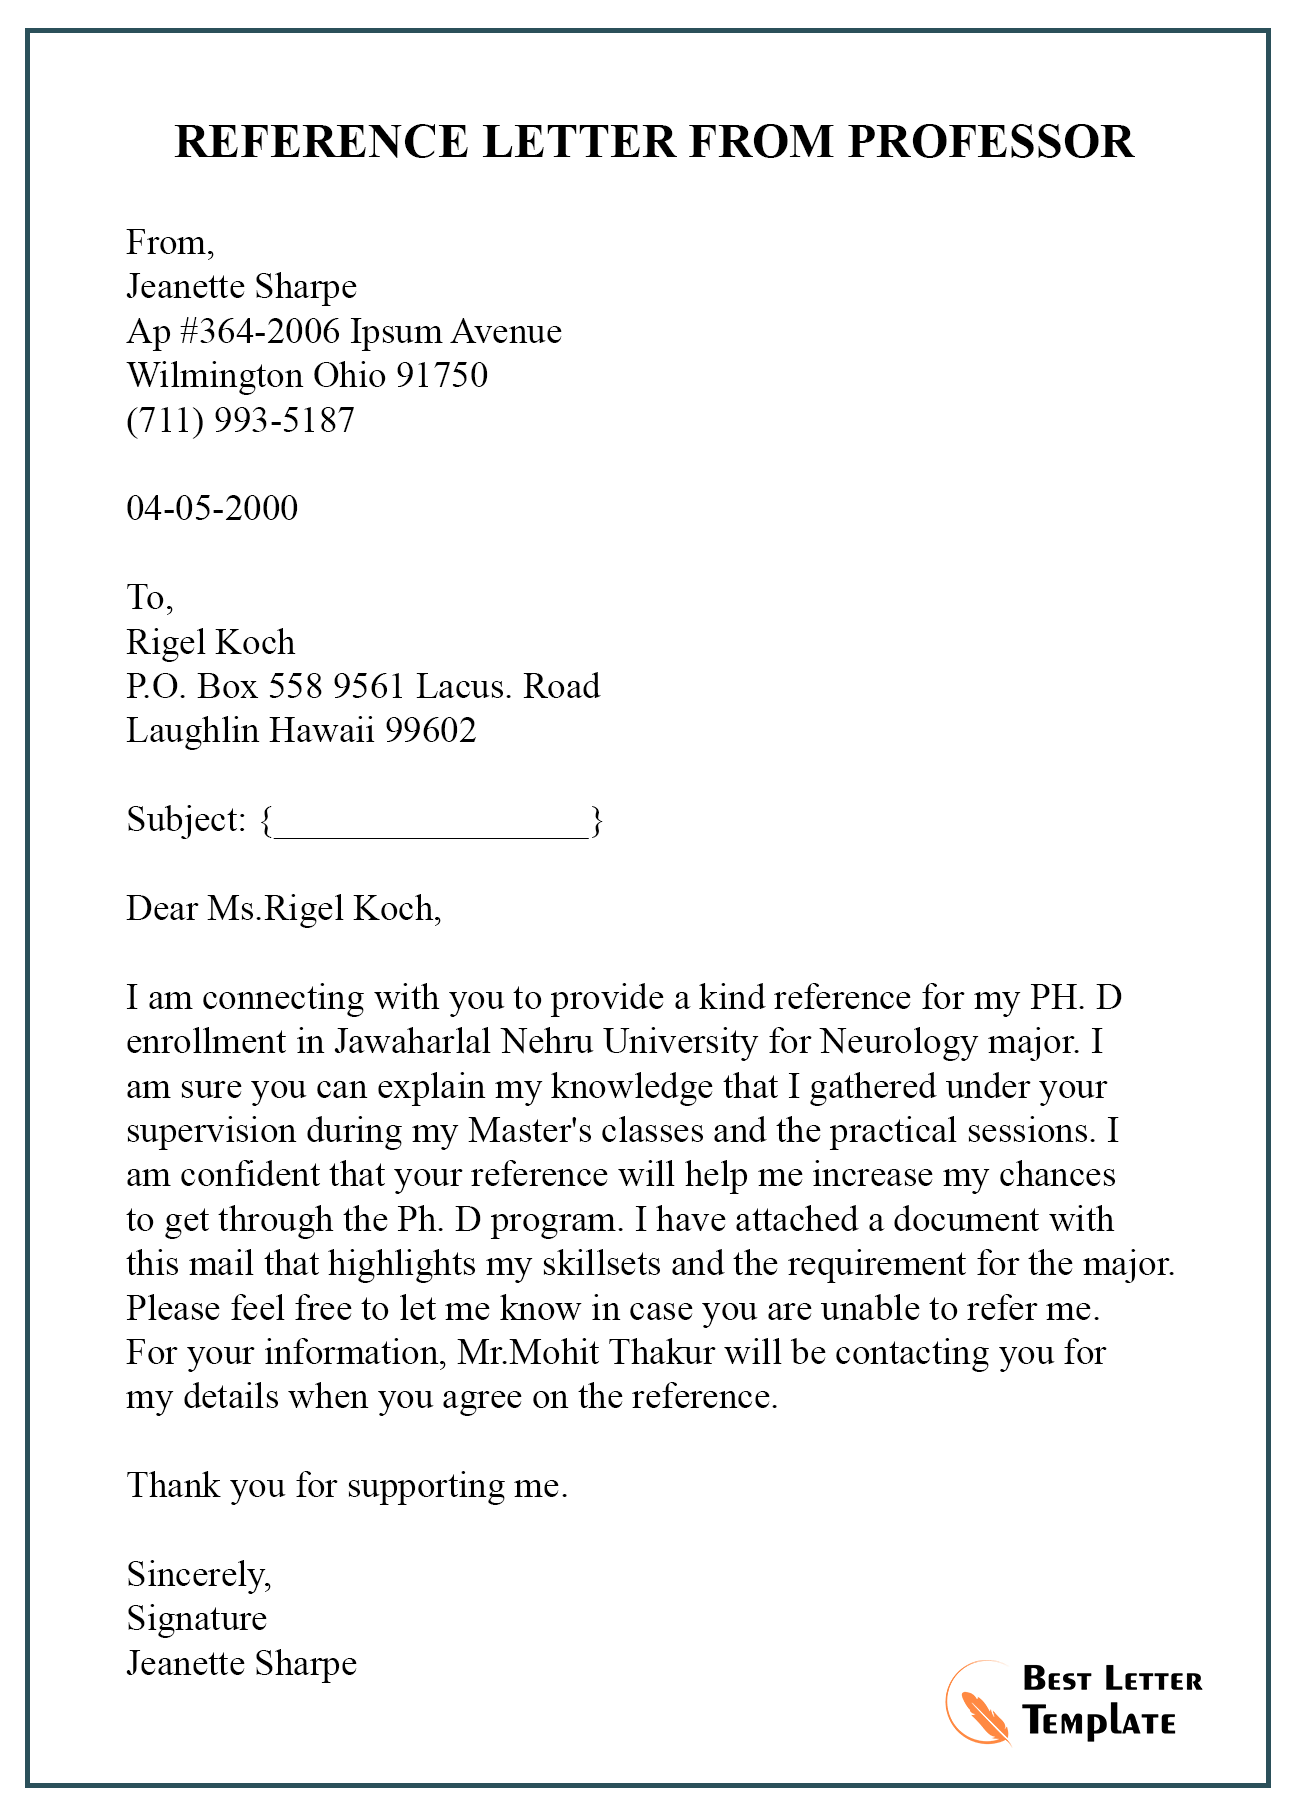 Request Letter Of Reference from bestlettertemplate.com